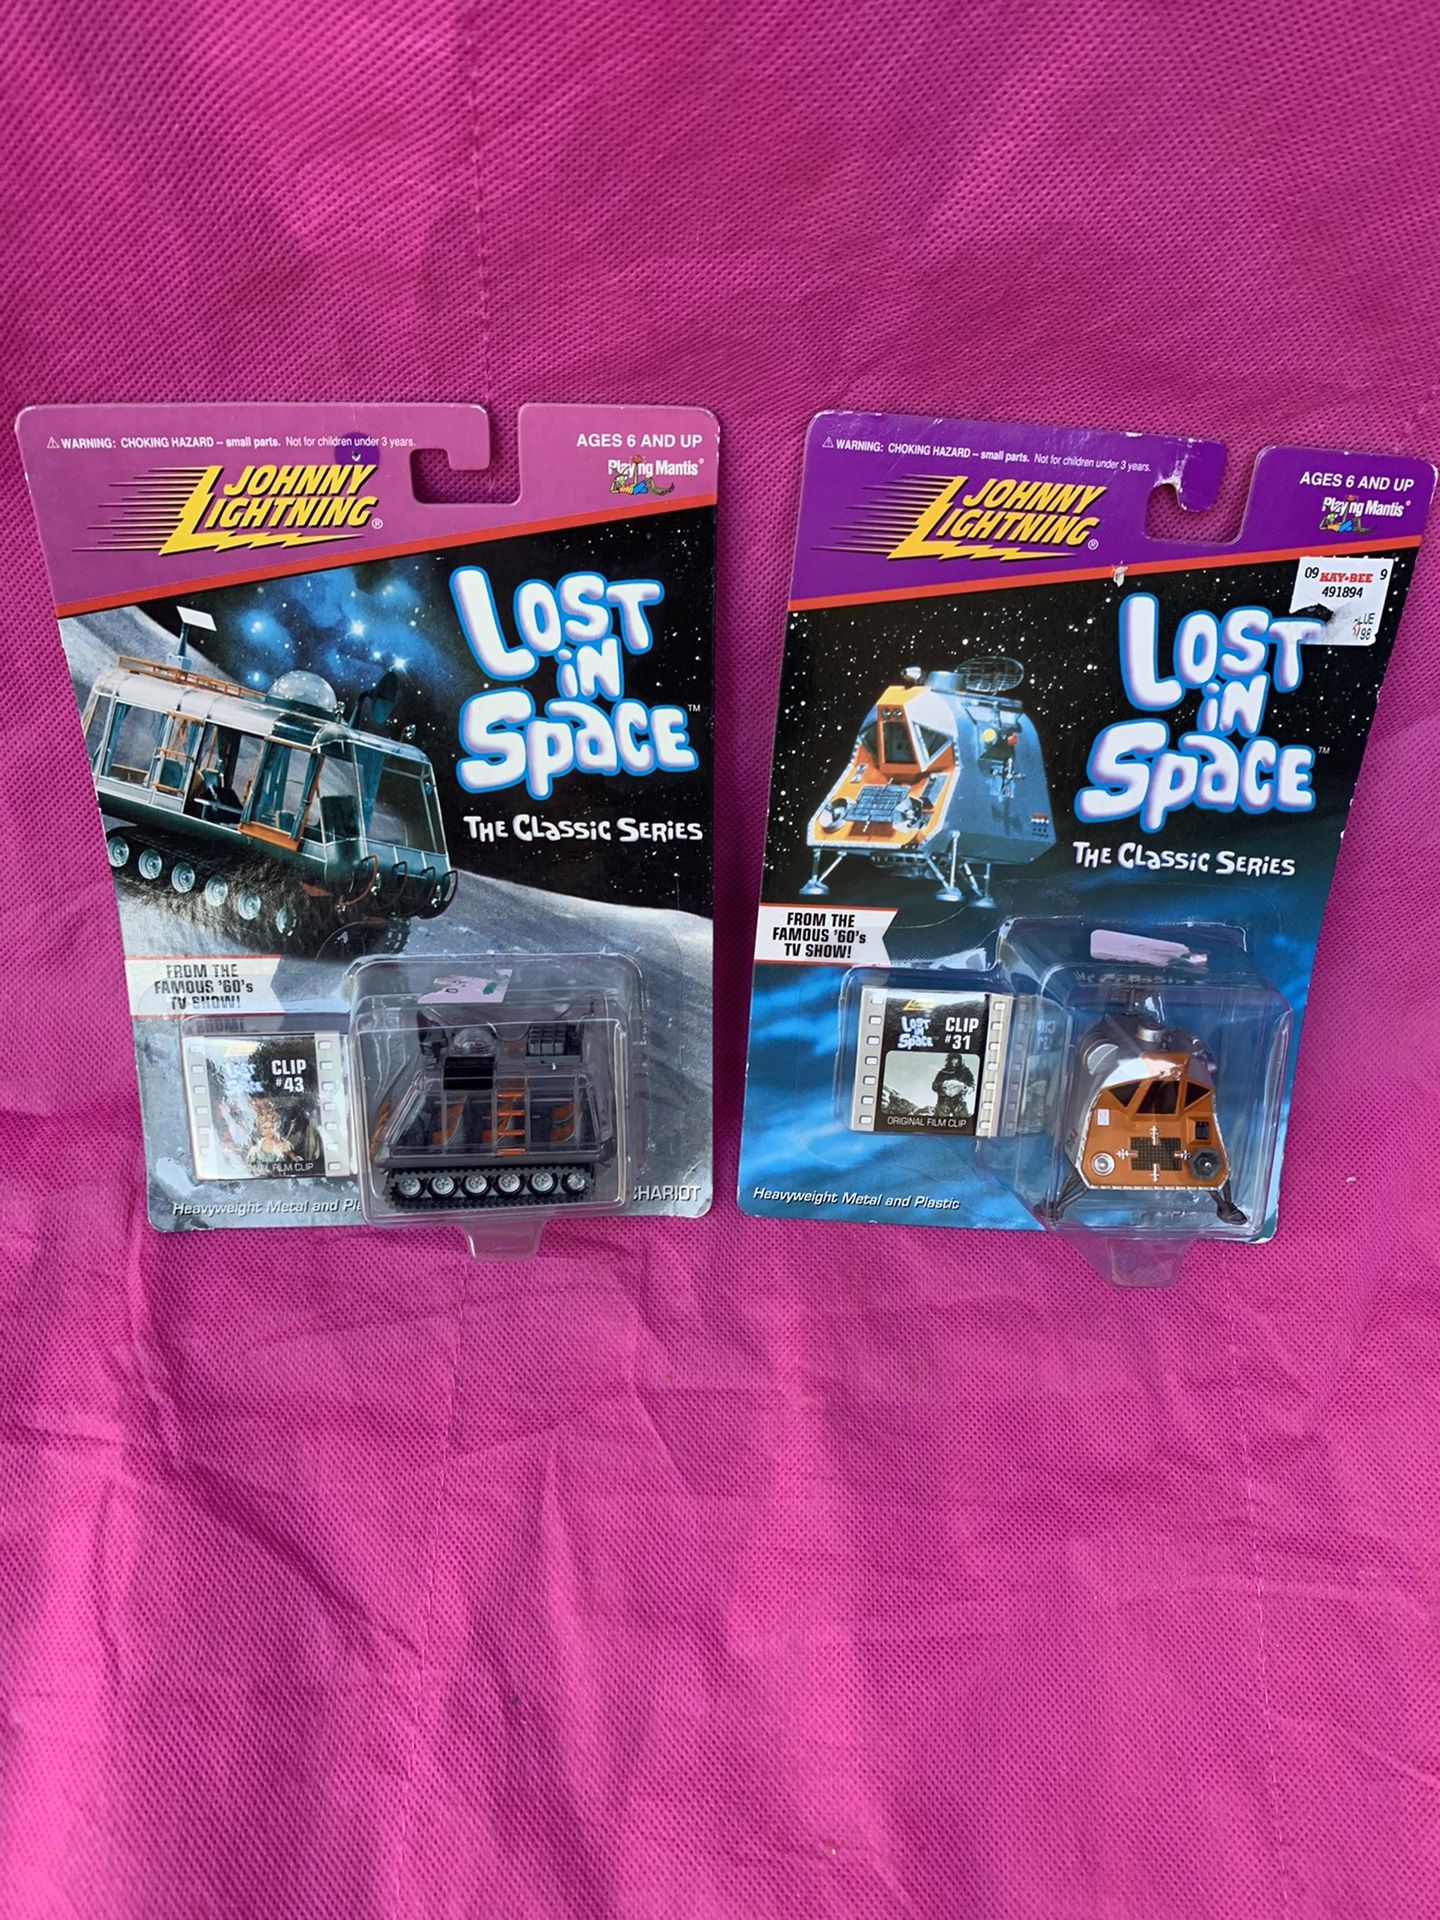 Collectible lost in space toys